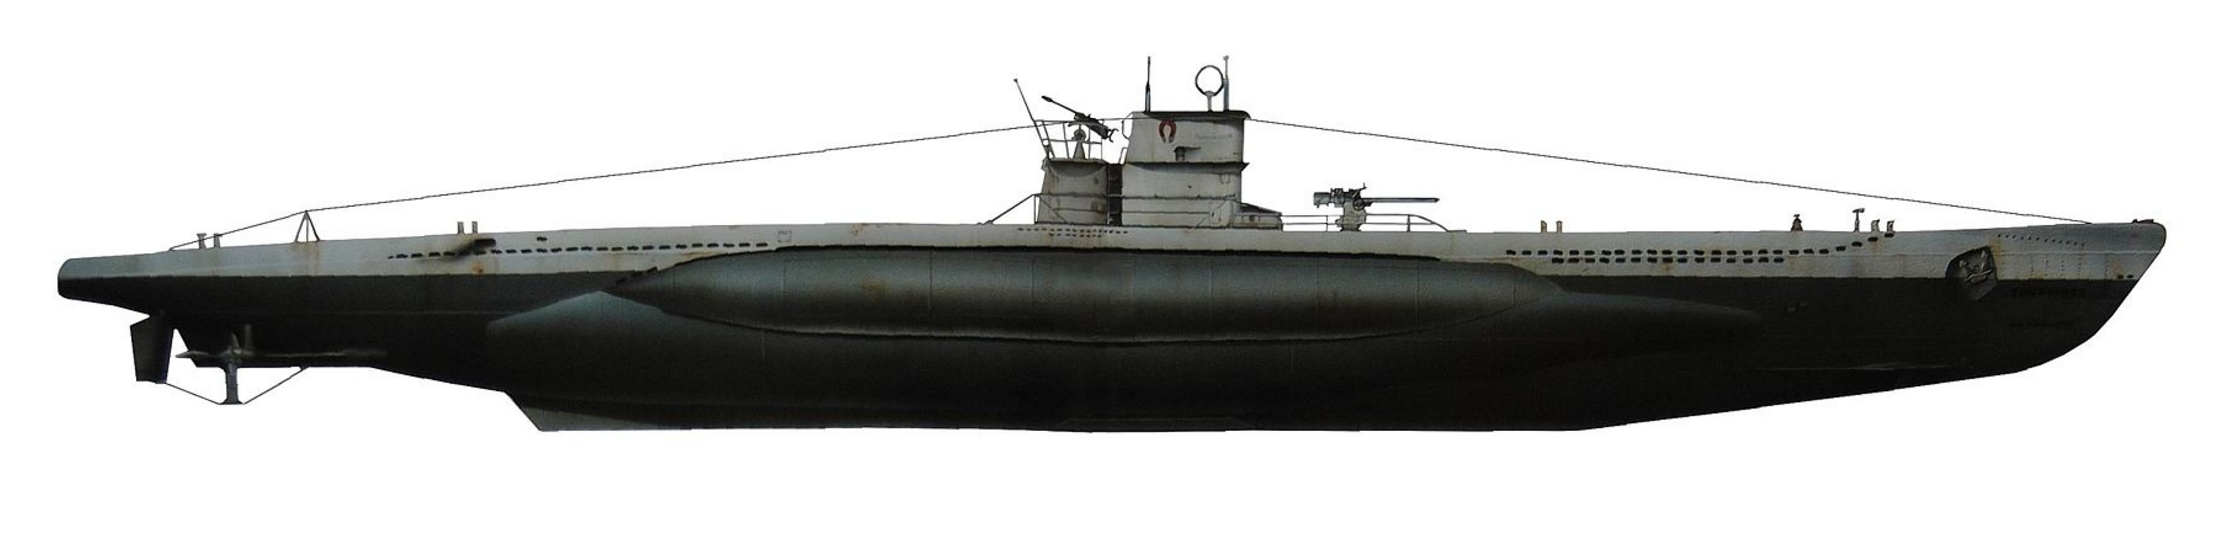 Nazi Sub Portrayed In Raiders Of The Lost Ark Discovered In The North Atlantic